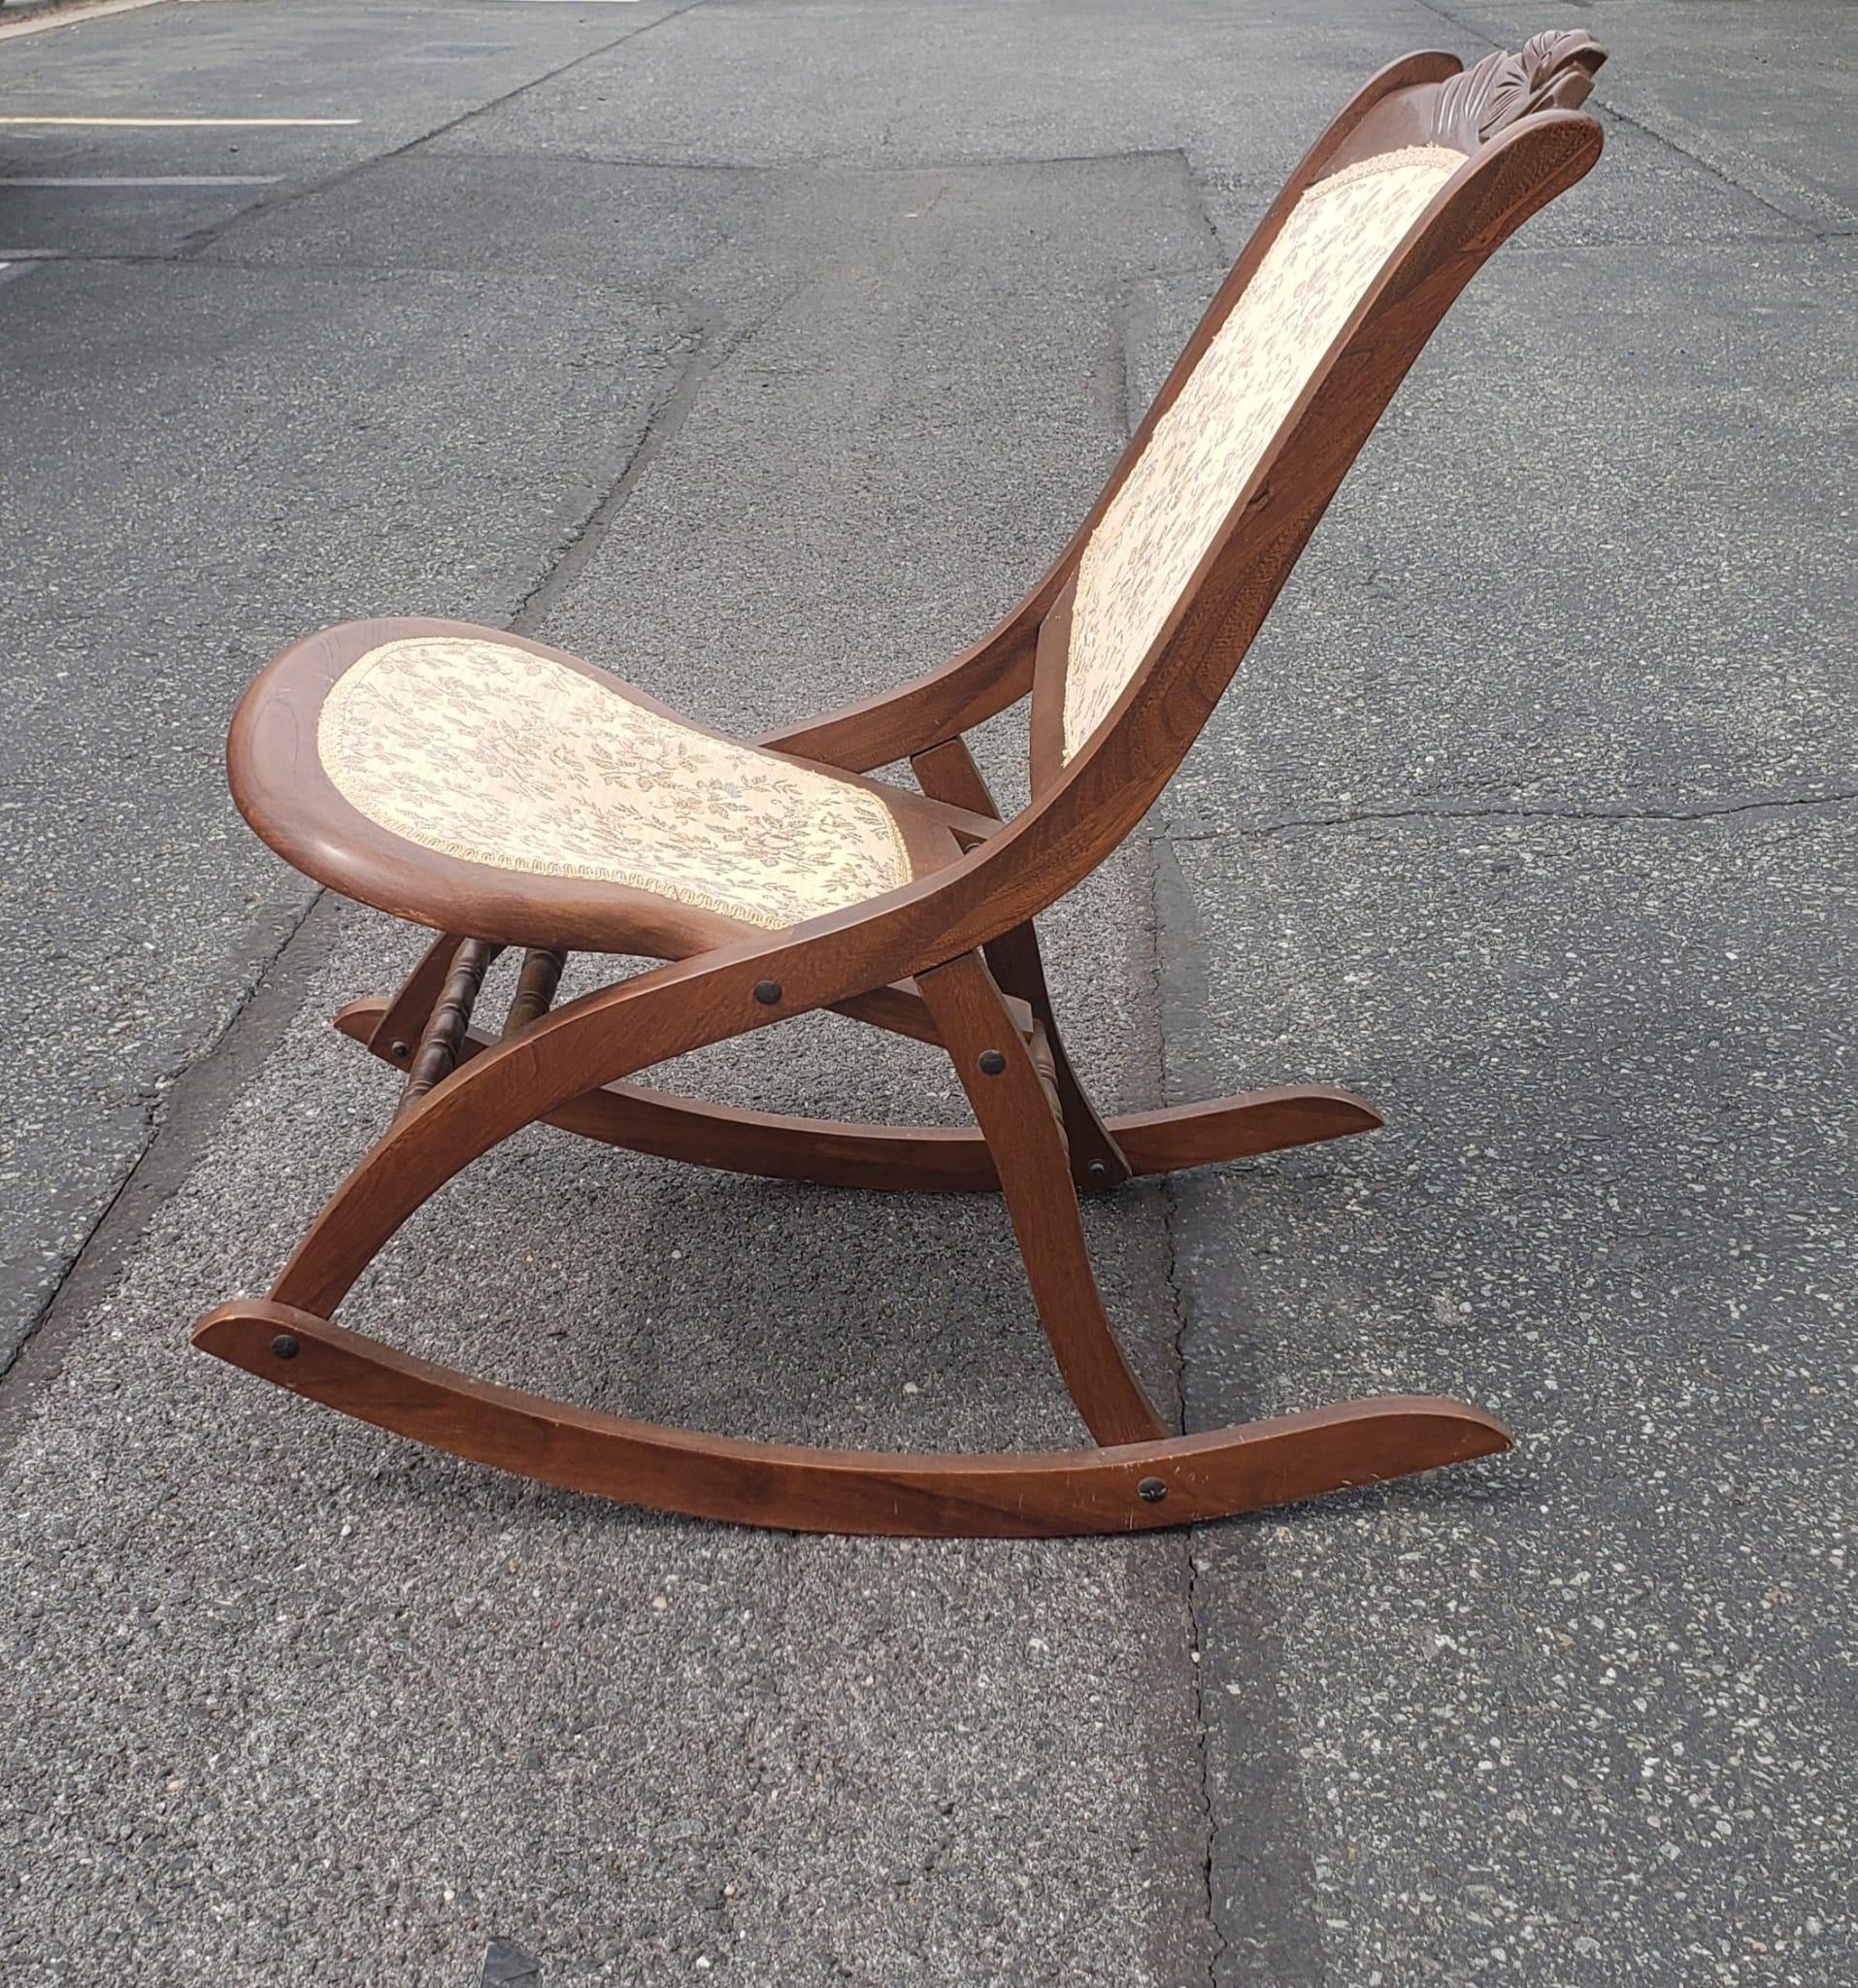 An Early 20th century Victorian Style carved Walnut and Upholstered rocking chair. 